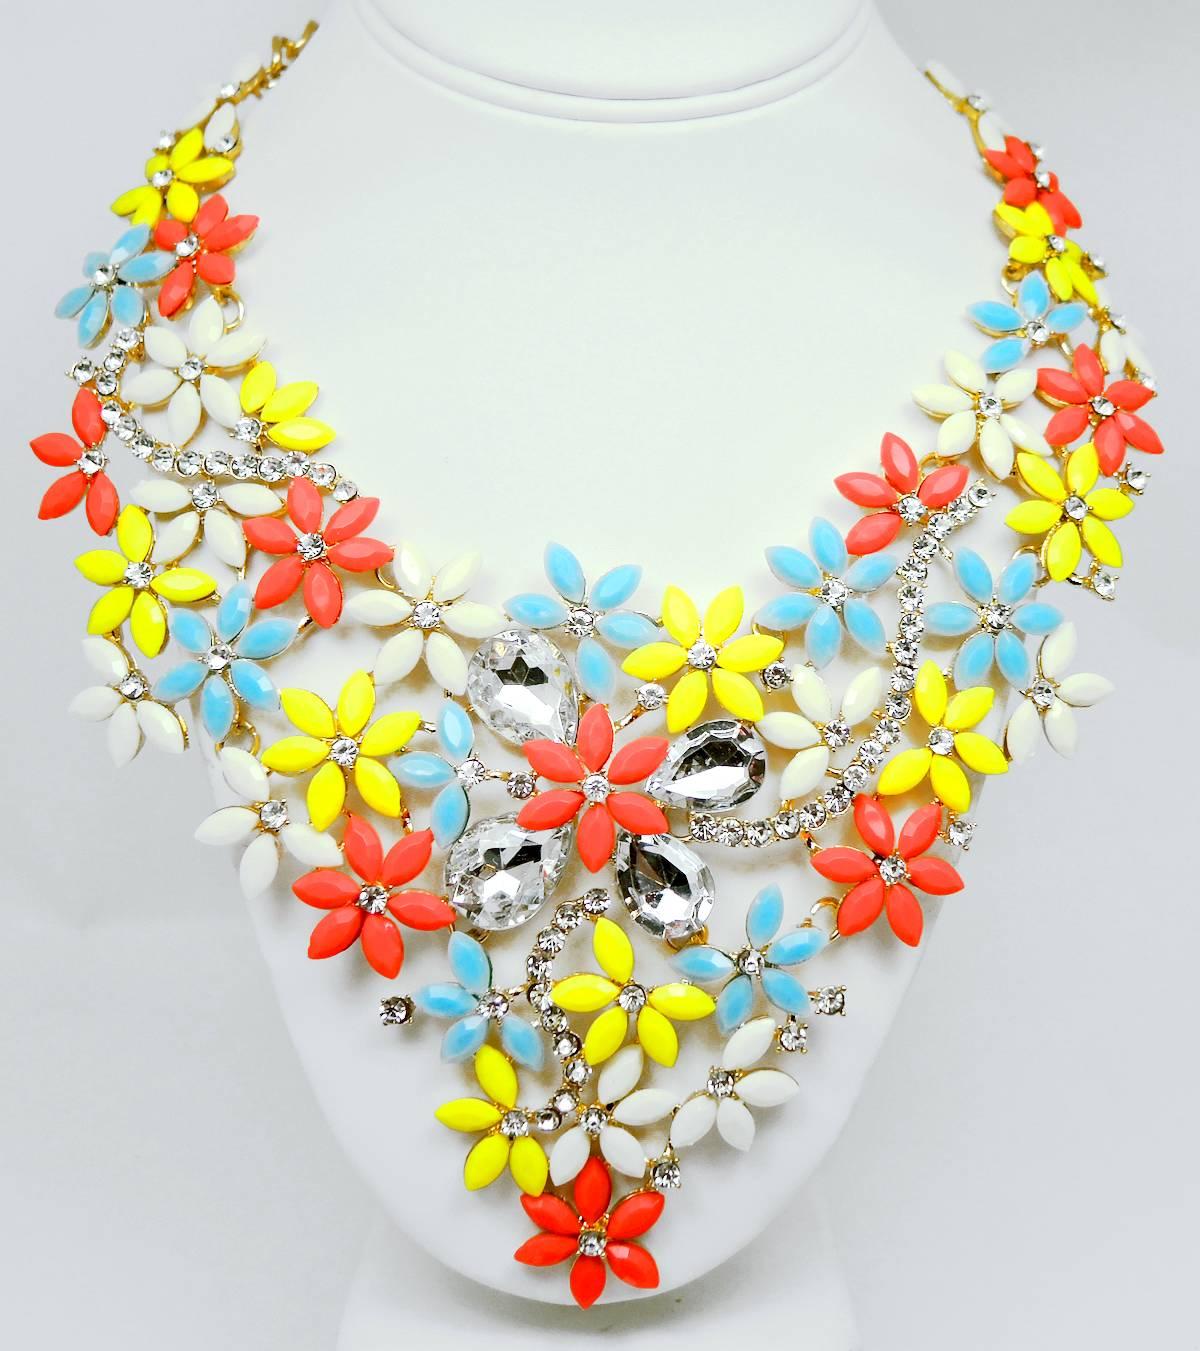 This is a very pretty fun floral necklace that has pink, white, yellow and blue flowers. It is designed with rhinestone accents and is in a gold tone setting with a lobster clasp. It measures 24” x 4-1/2” at the drop. It is in excellent condition.